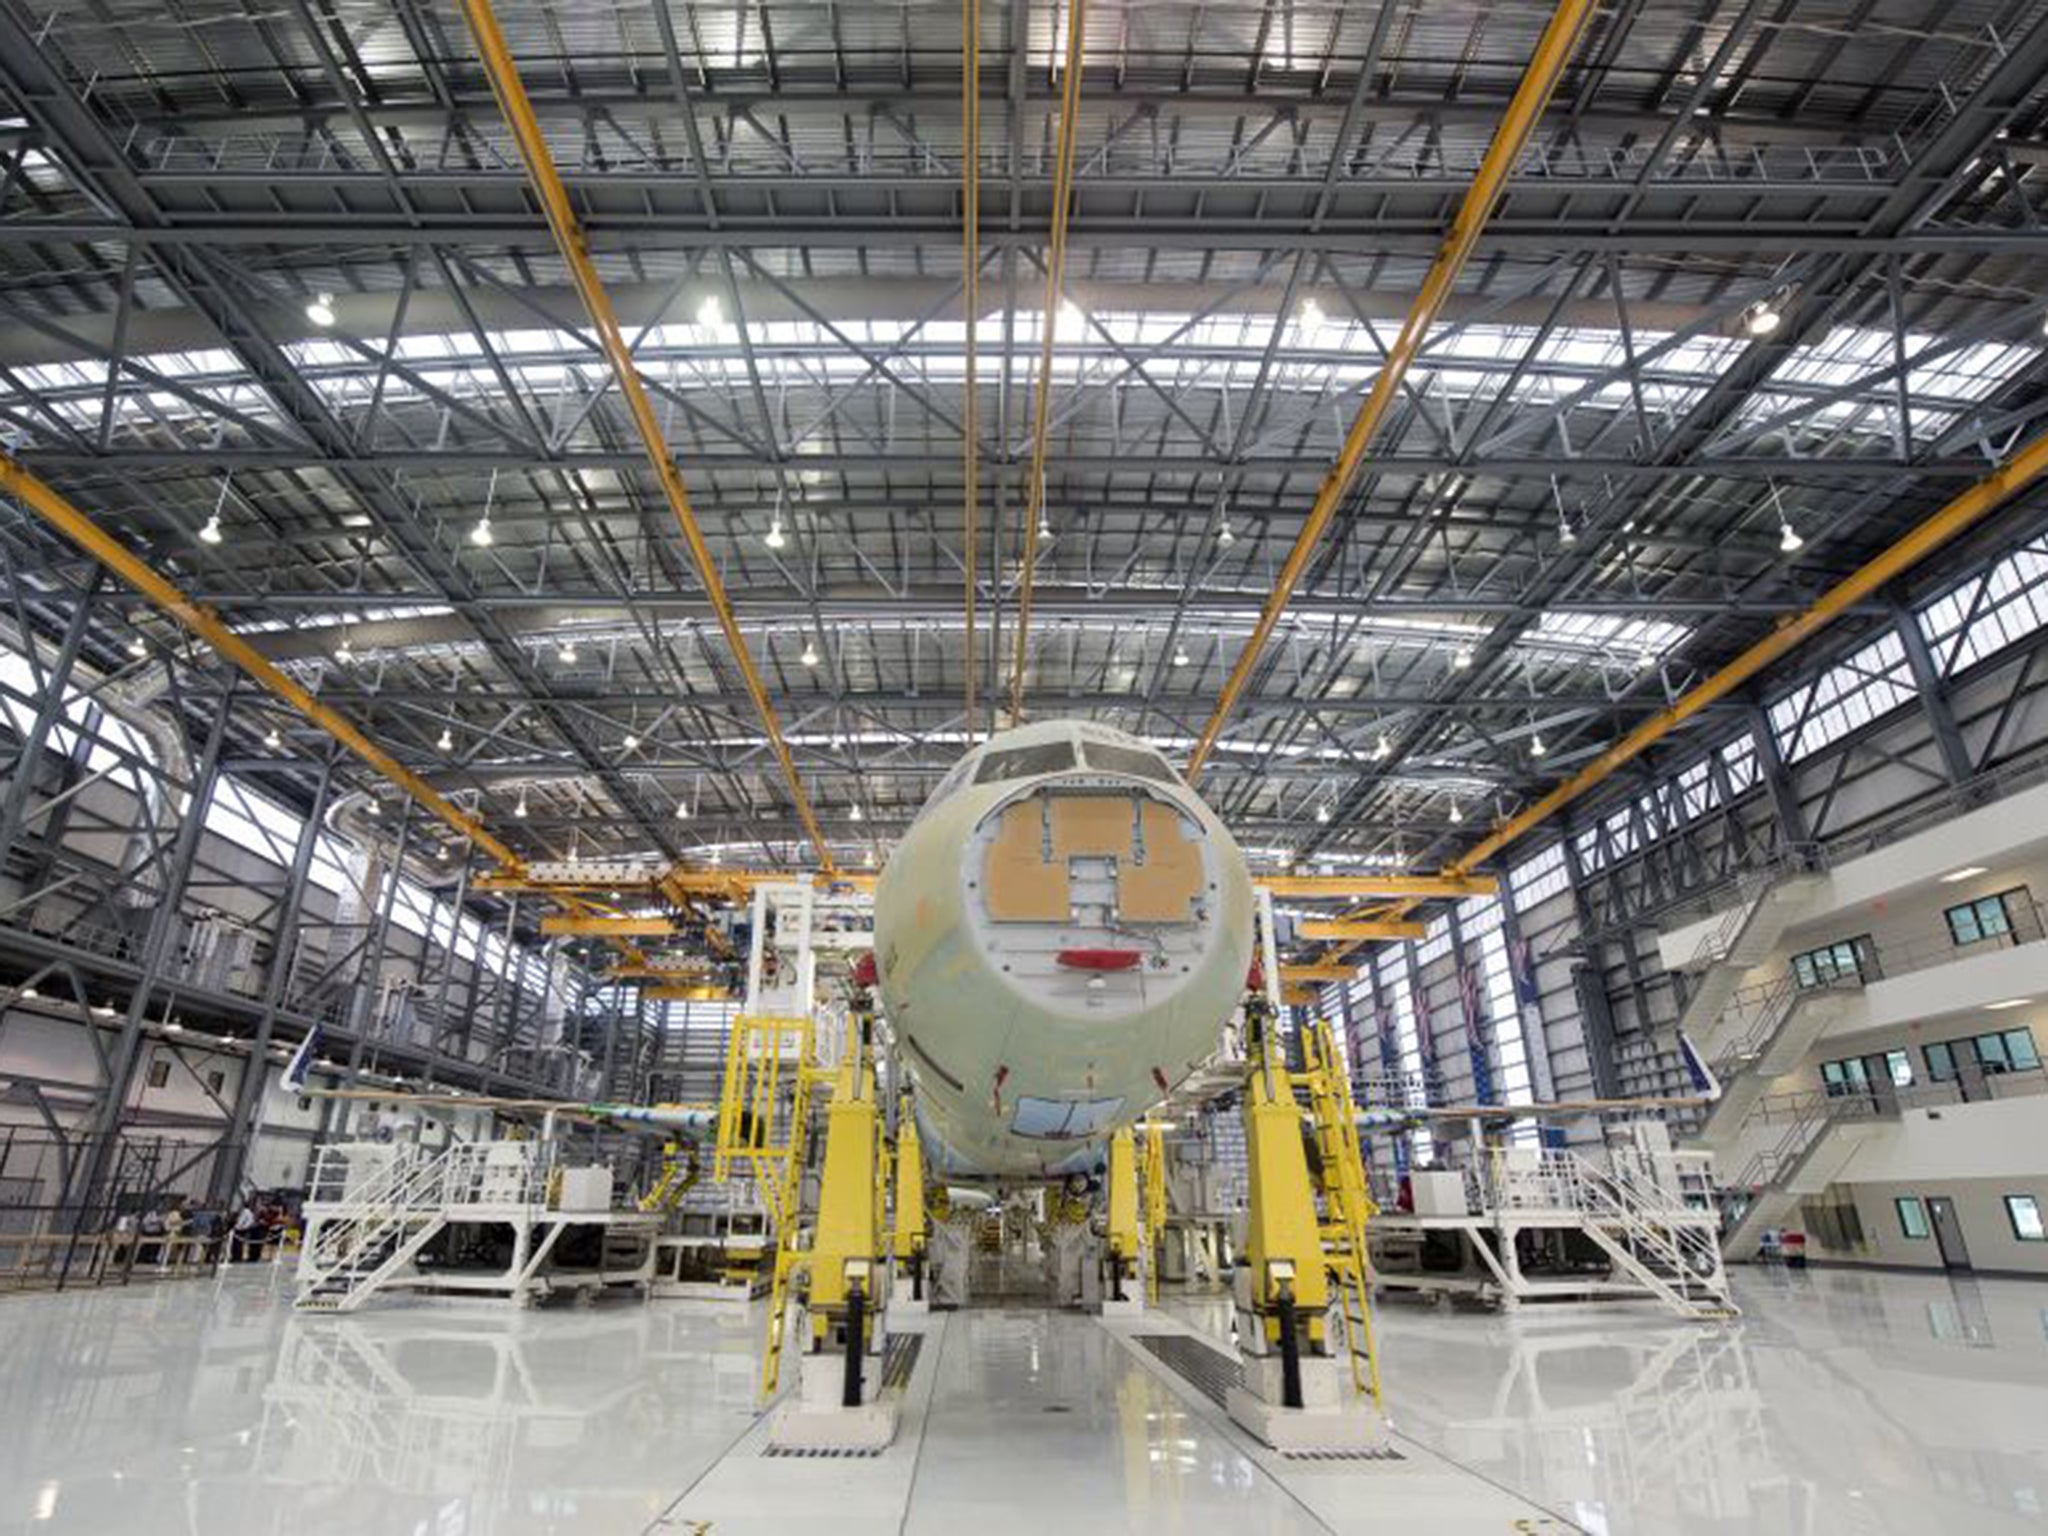 The new Airbus plant in Mobile, Alabama will assemble, test and paint the Airbus A320 line, Airbus’s most successful family of commercial liners